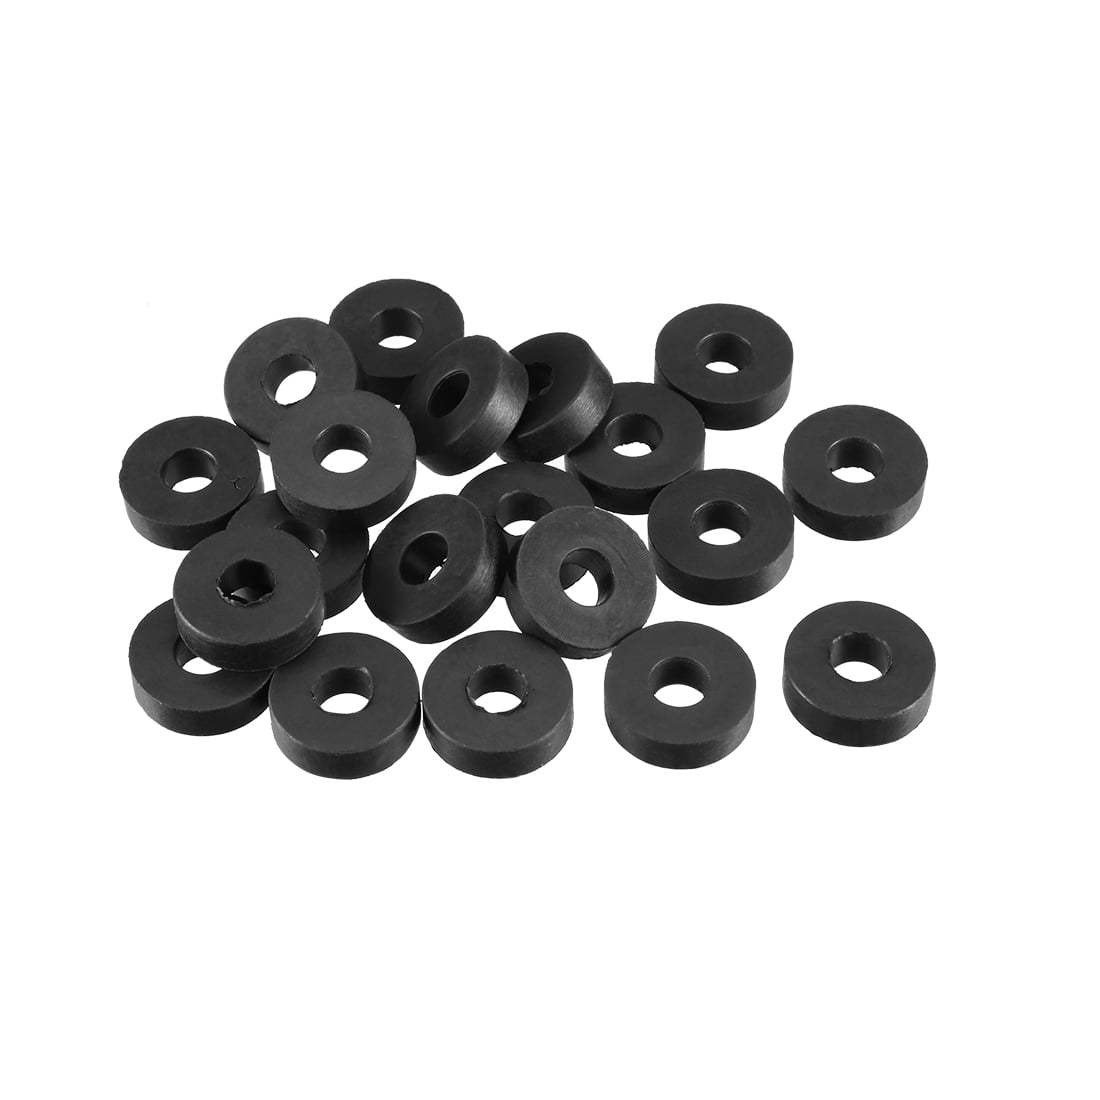 159A 5 Pcs 5mm x 12mm x 1mm O-Ring Hose Gasket Silicone Washer 